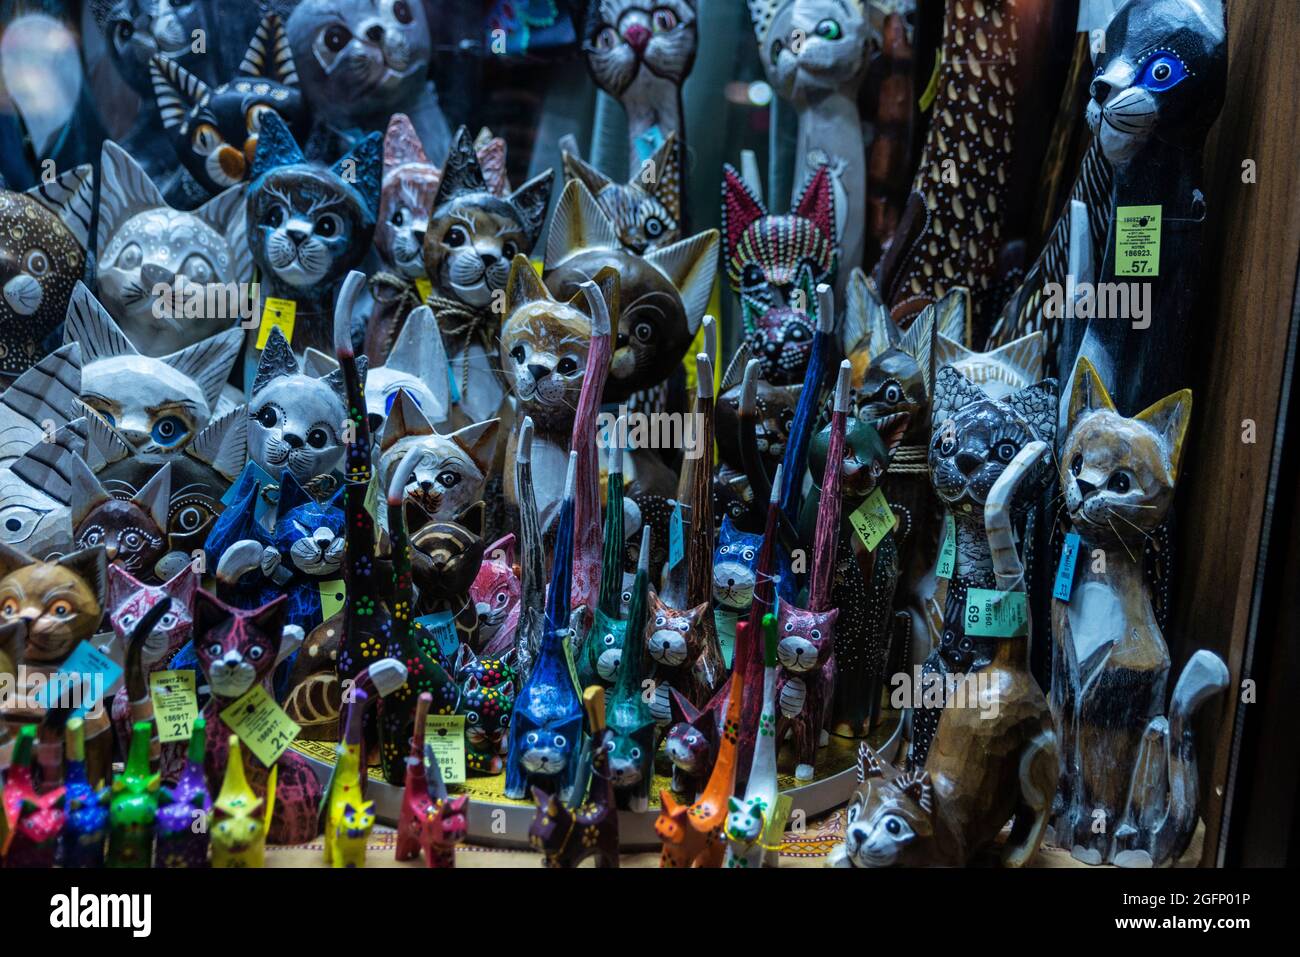 Krakow, Poland - August 29, 2018: Display of a Original polish pottery shop with cat figures at night in the Slawkowska Street, shopping street in Kra Stock Photo